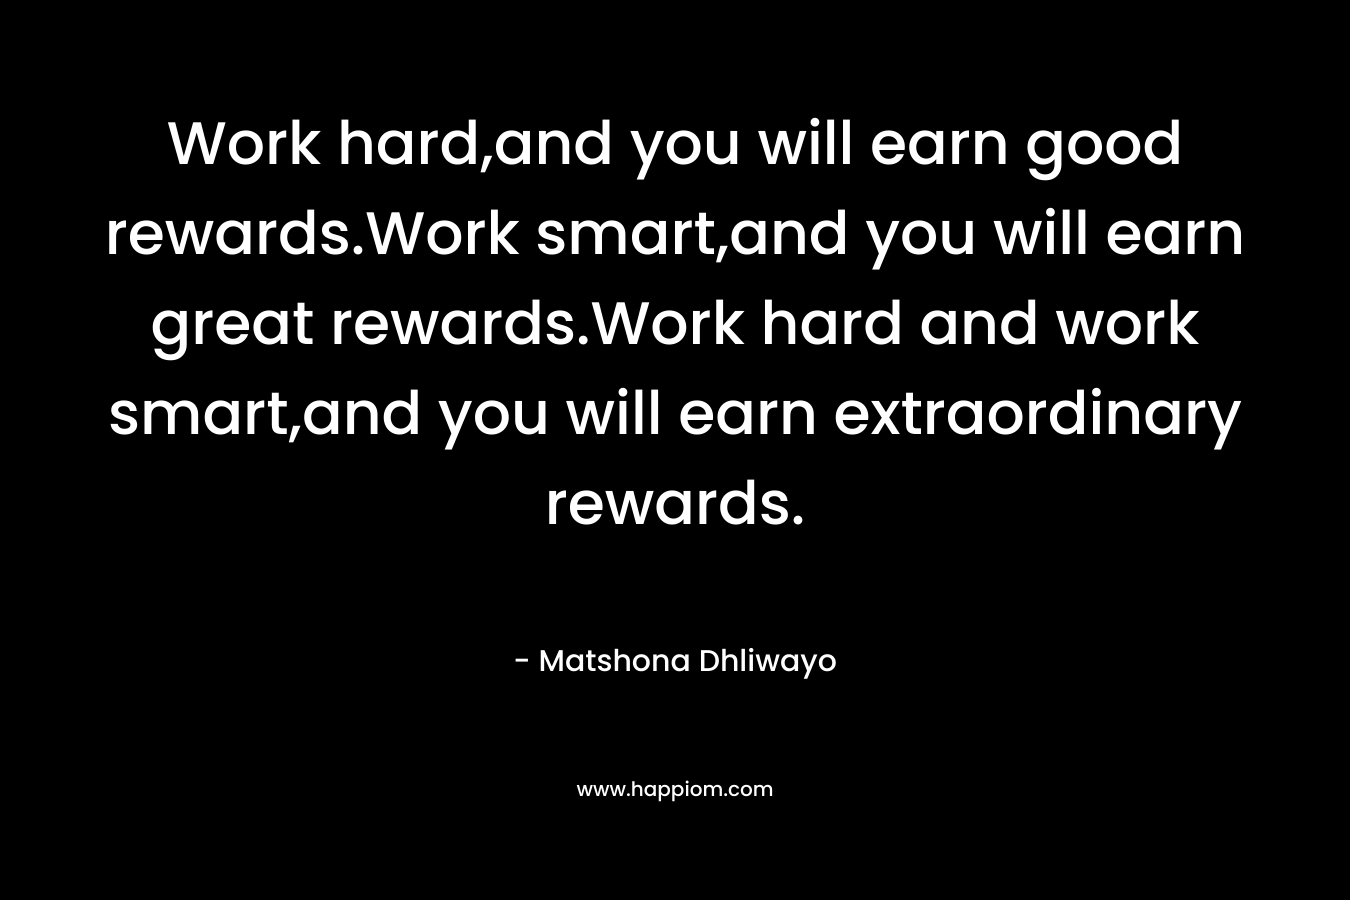 Work hard,and you will earn good rewards.Work smart,and you will earn great rewards.Work hard and work smart,and you will earn extraordinary rewards.